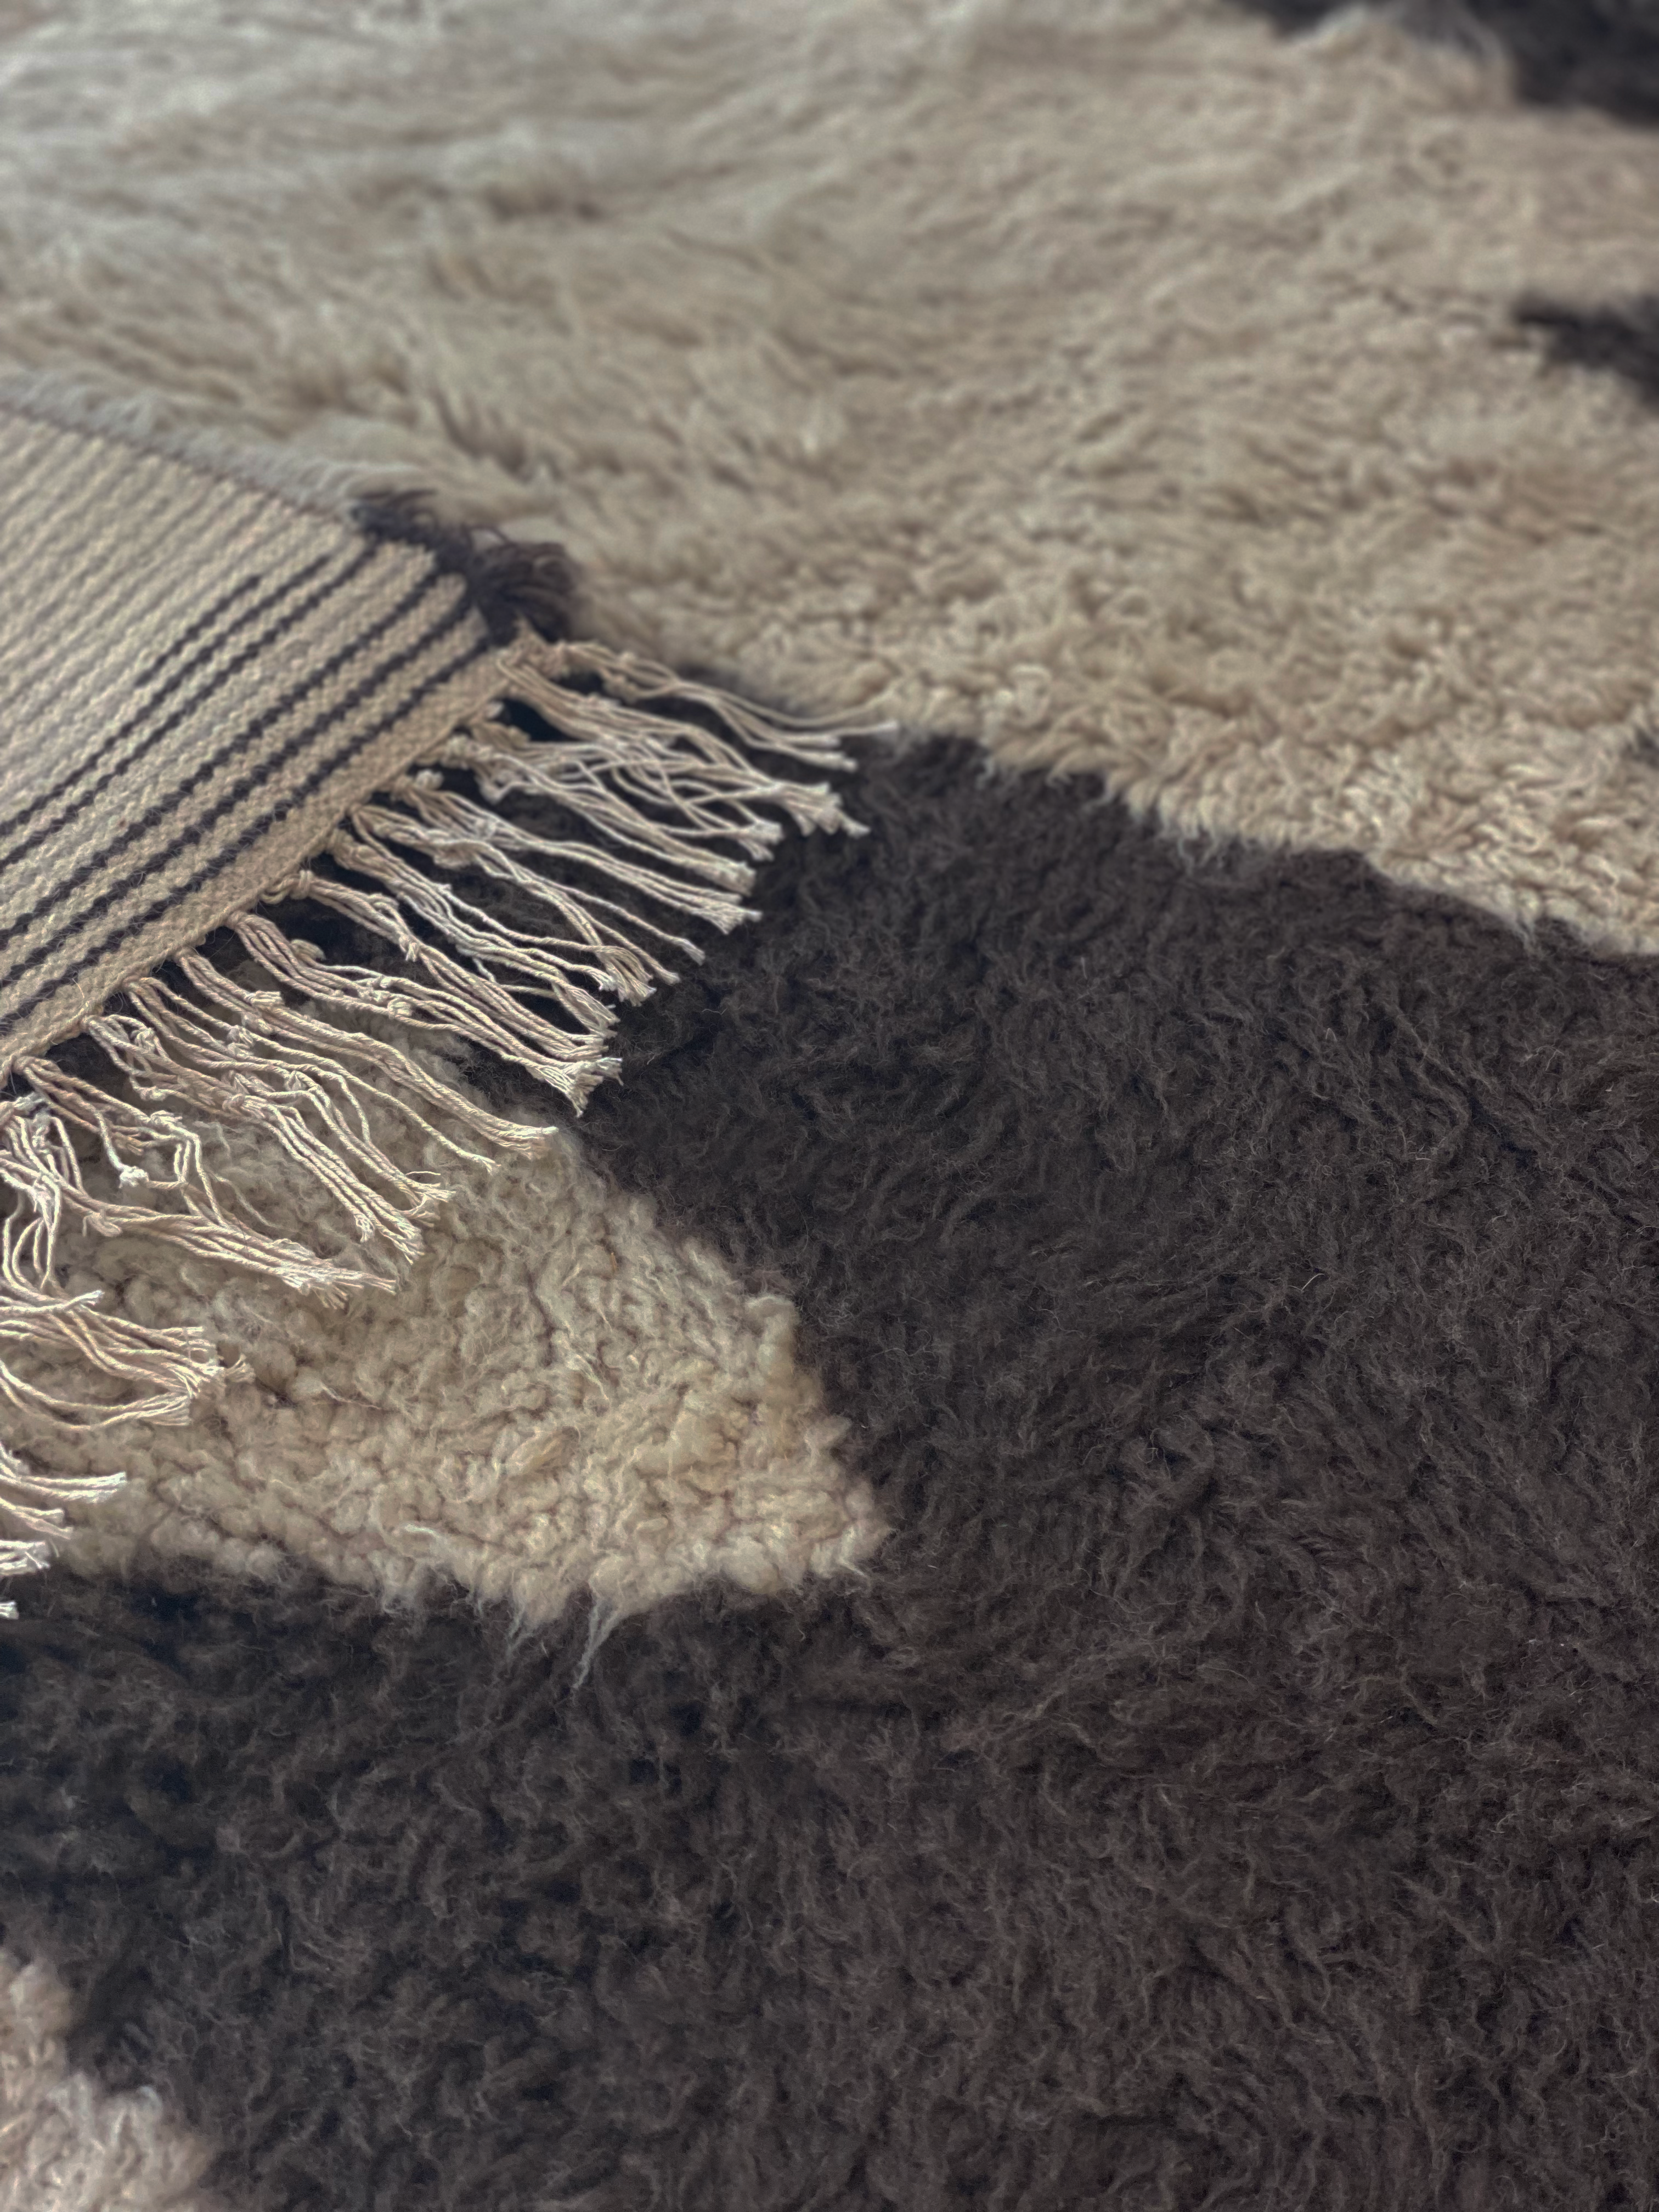 A close-up picture of the handmade artist rug made of 100% wool, showing details of the rug's knotting and color